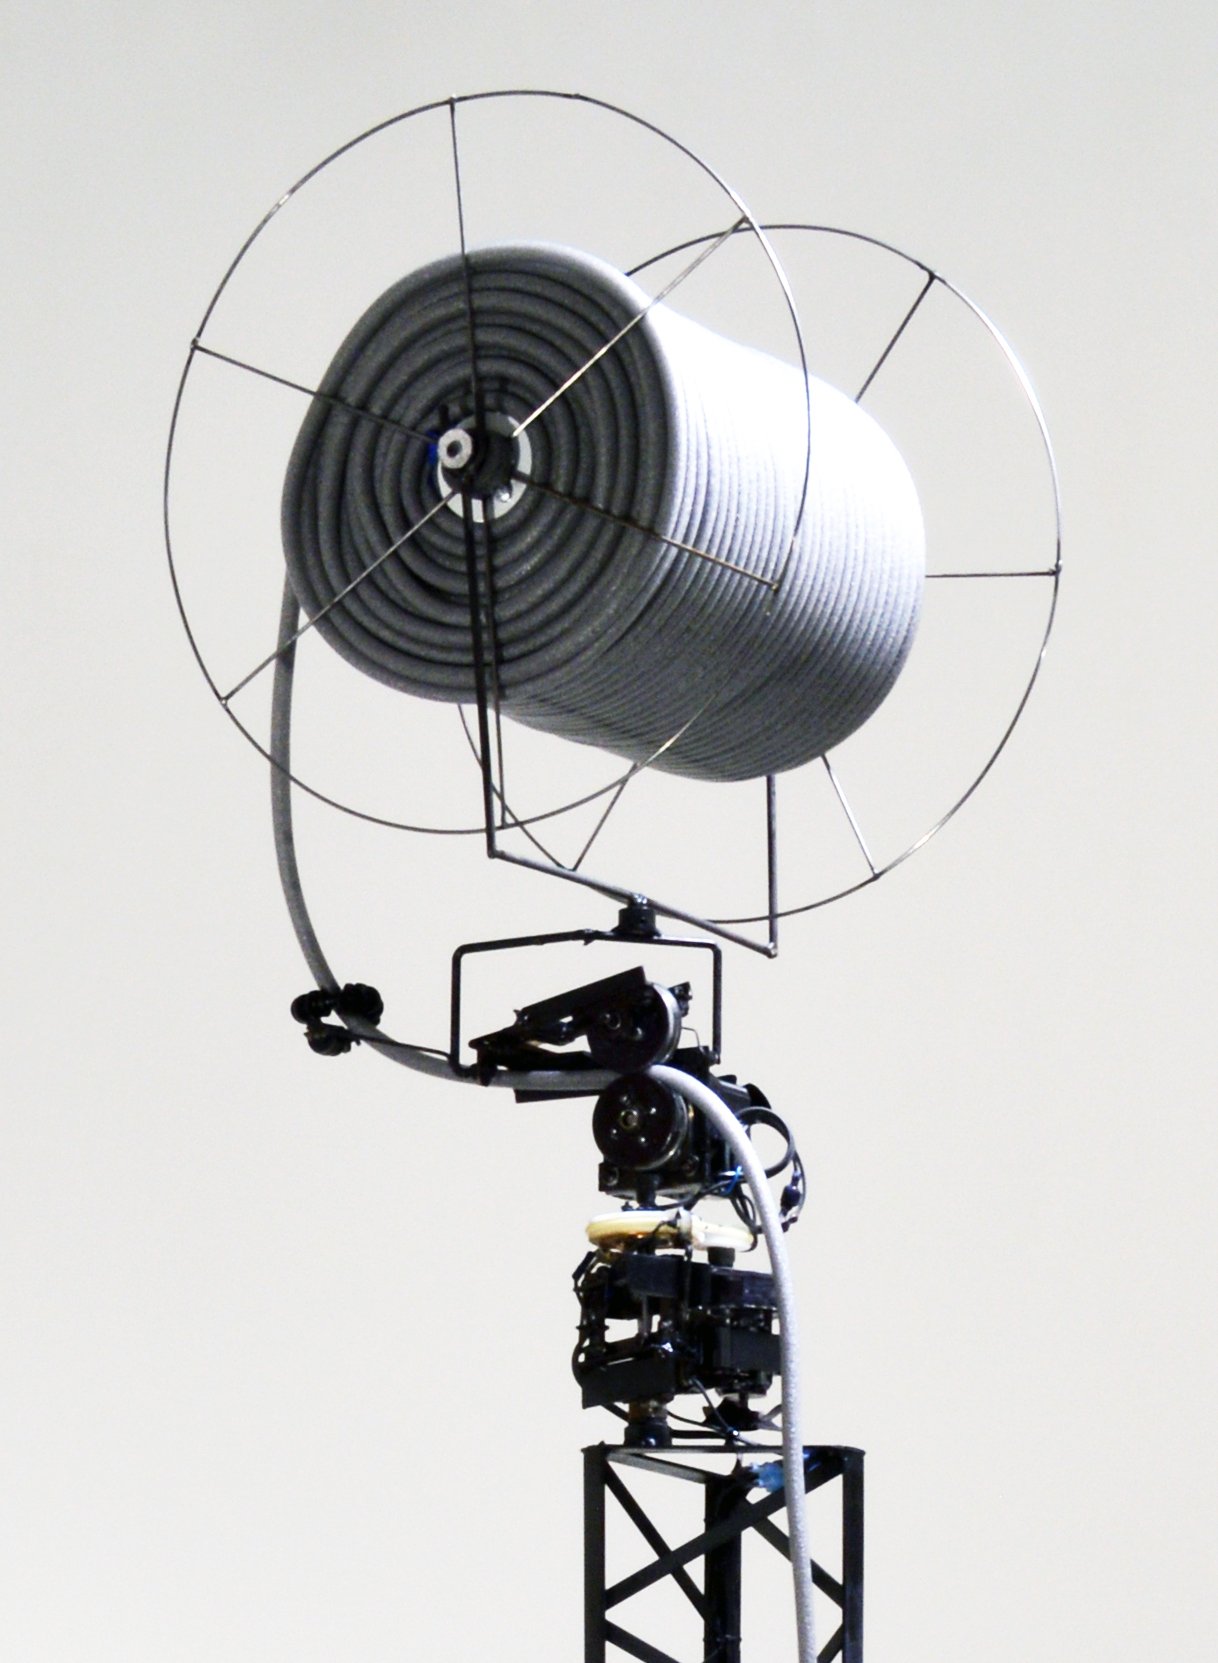  Host (2018), detail, one of six backer rod spools, steel with motor, foot pedal and timer, freestanding kinetic sculpture: 15 feet tall, variable 6 foot diameter pile unspools at base 